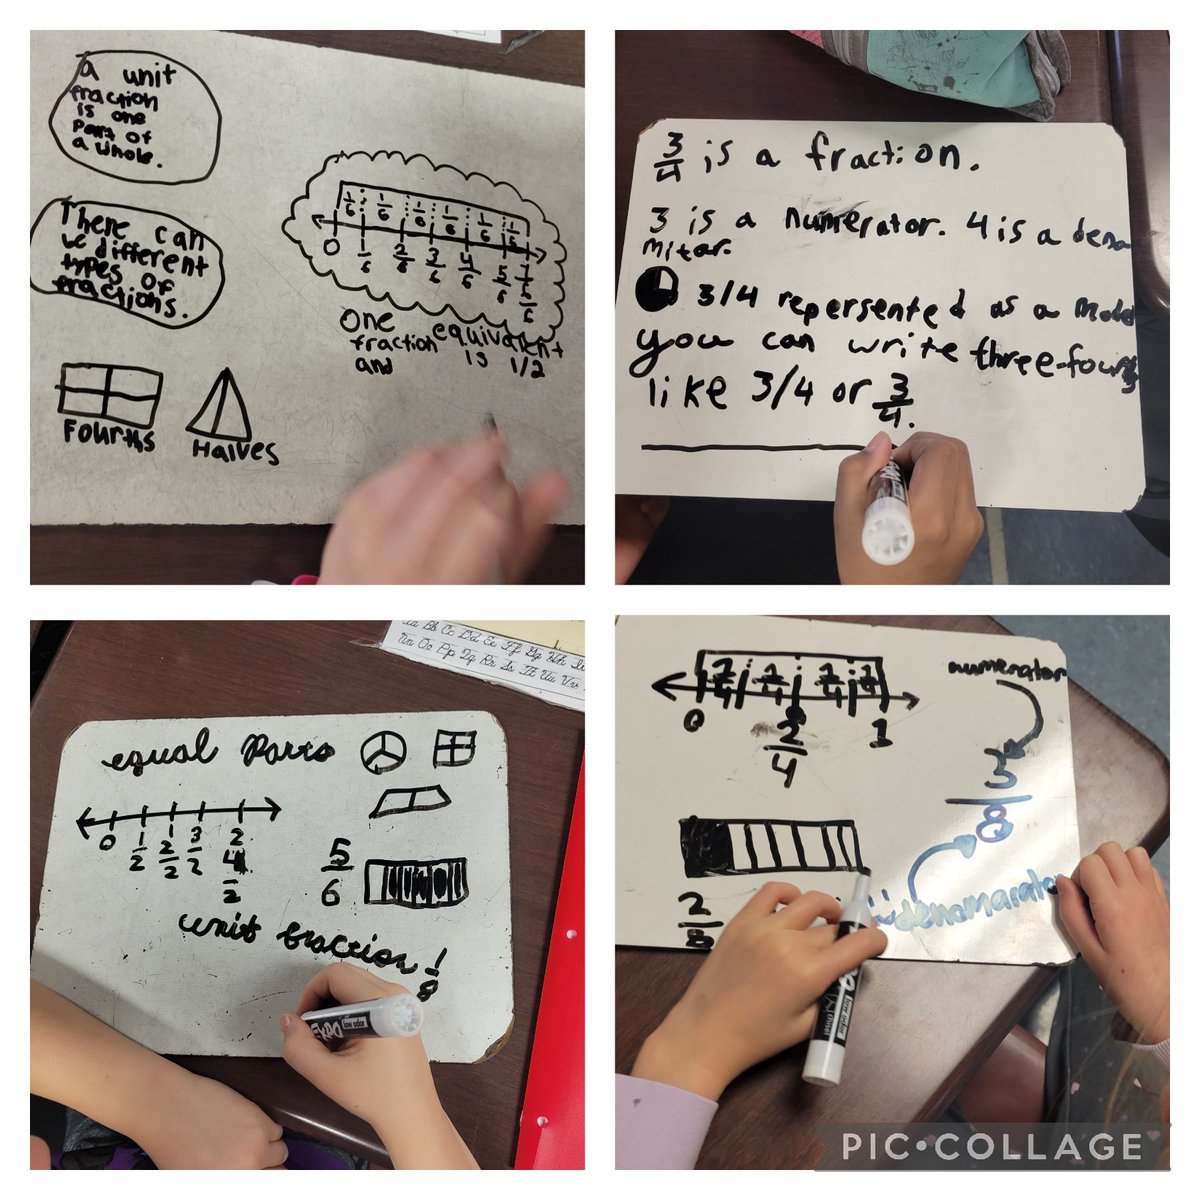 We started with a brain dump for #retrievalpractice since we are returning to fractions this week. We remembered a lot of knowledge to get our brains ready to practice & learn more about fractions #FCPSMBE